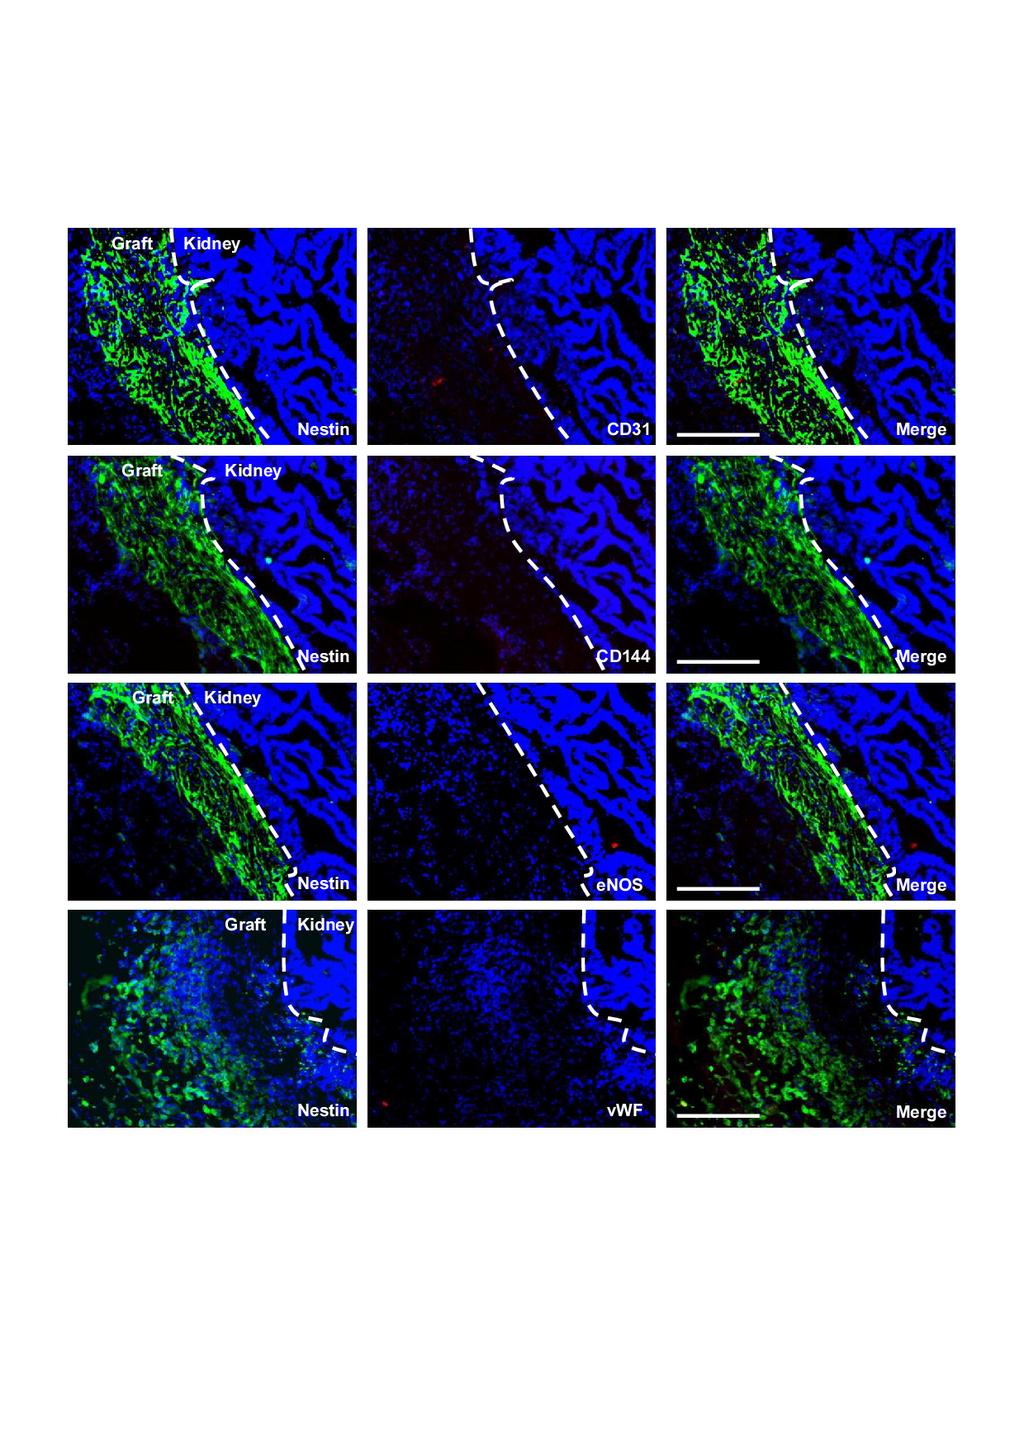 Supplementary Figure 3. Neural grafts do not express antigens considered unique to hesc-derived CD31+CD144+ endothelial progenitor cells.